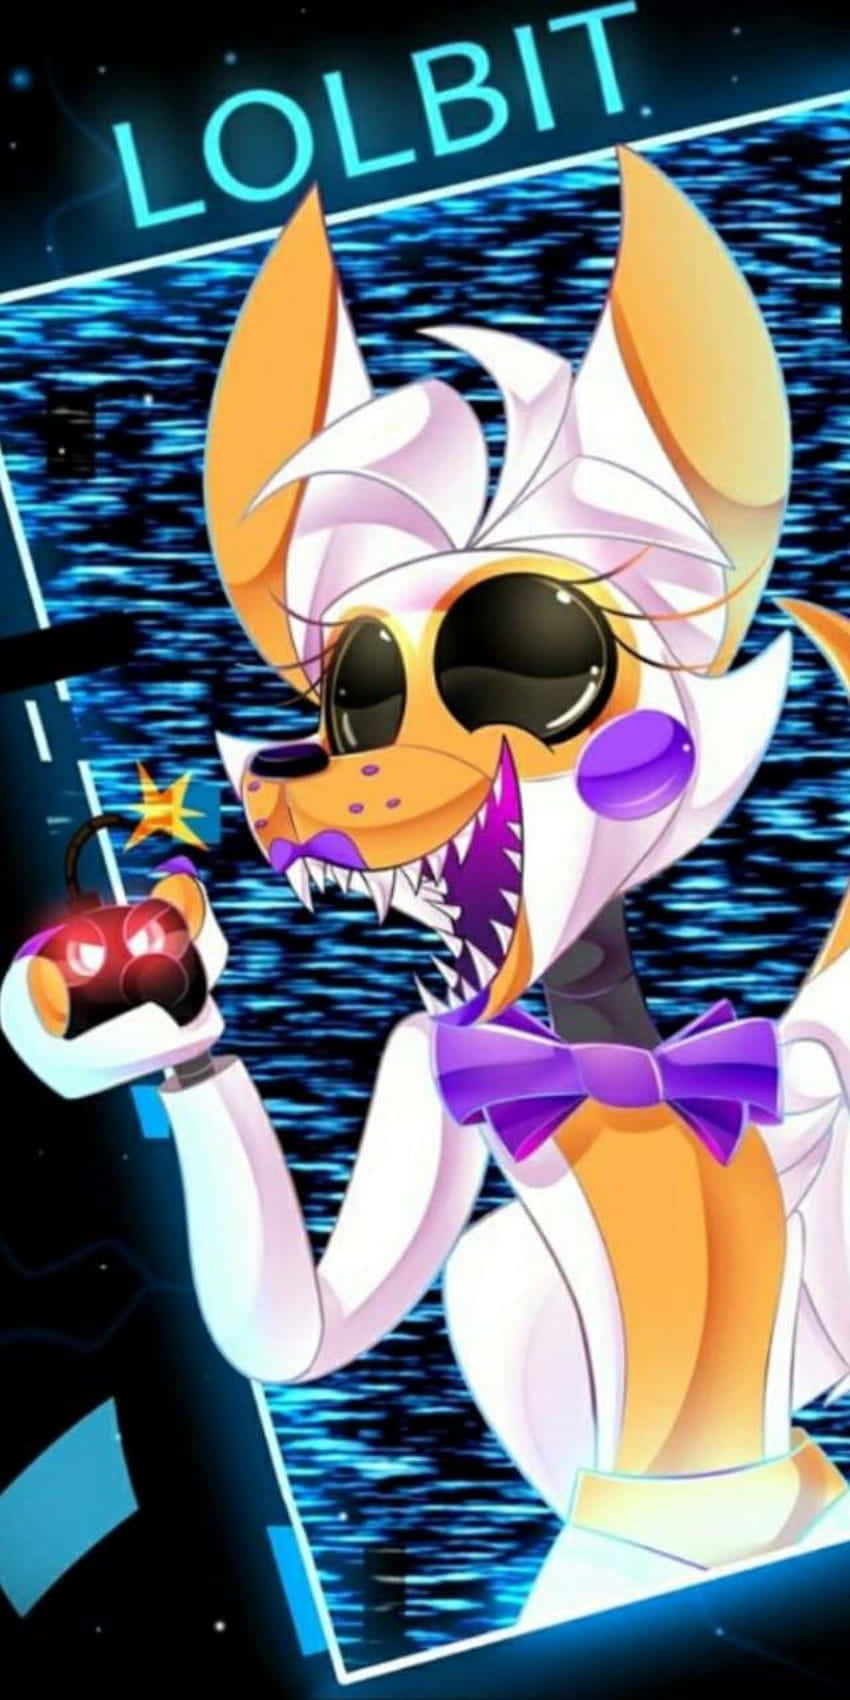 "Discover your true self with 'Lolbit'." Wallpaper